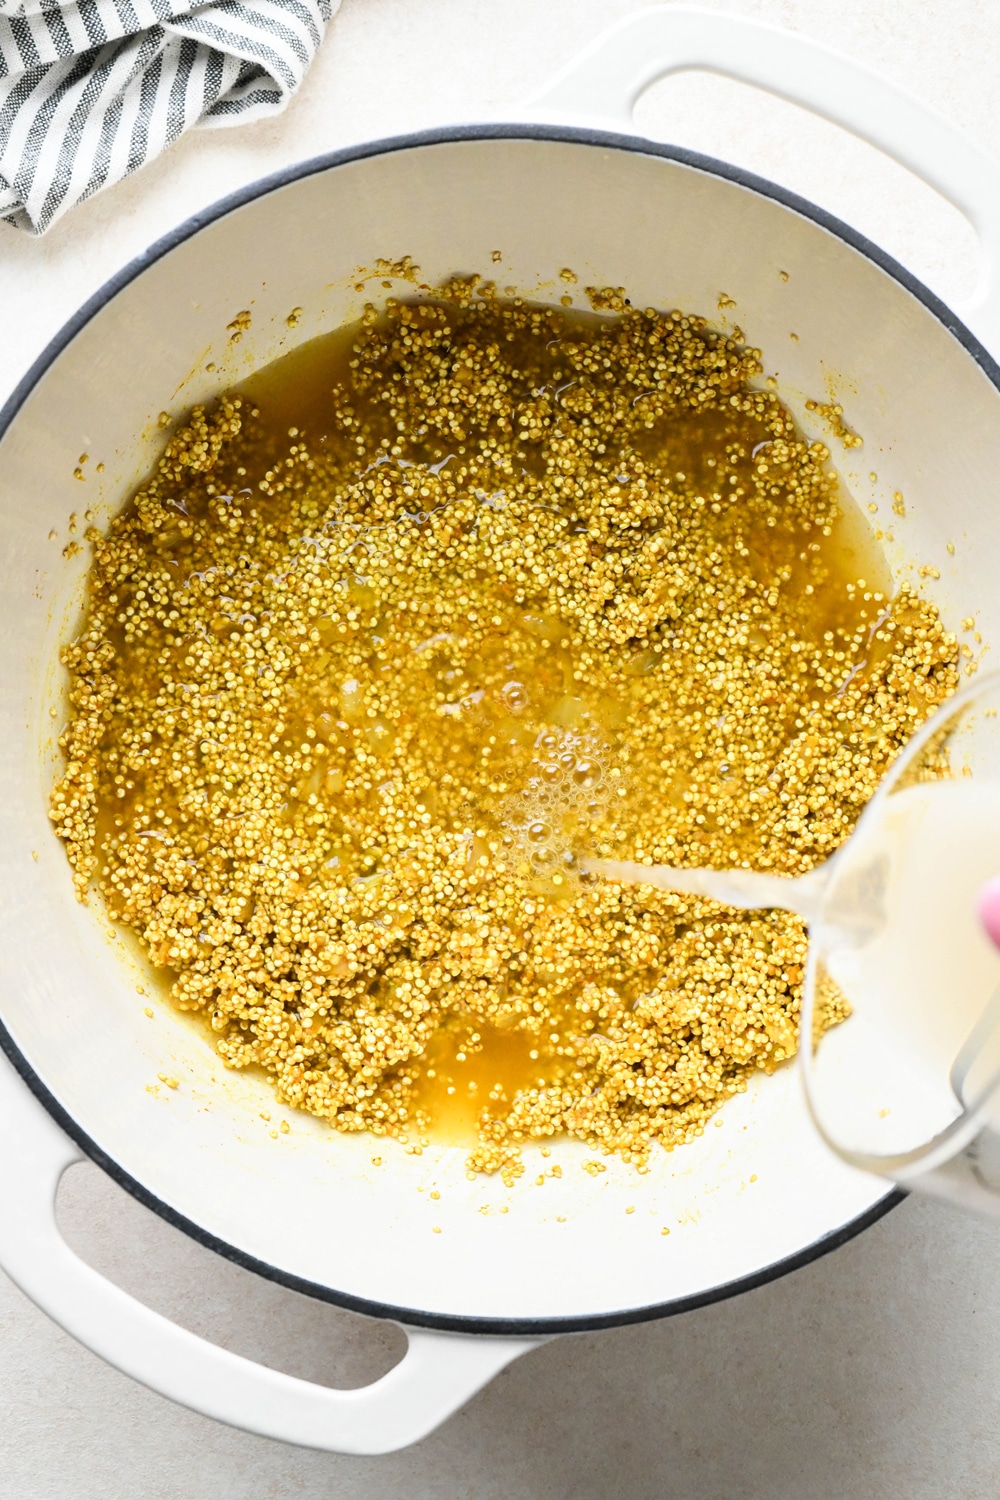 How to make curried quinoa pilaf: Pouring broth into the pot with quinoa and spices.